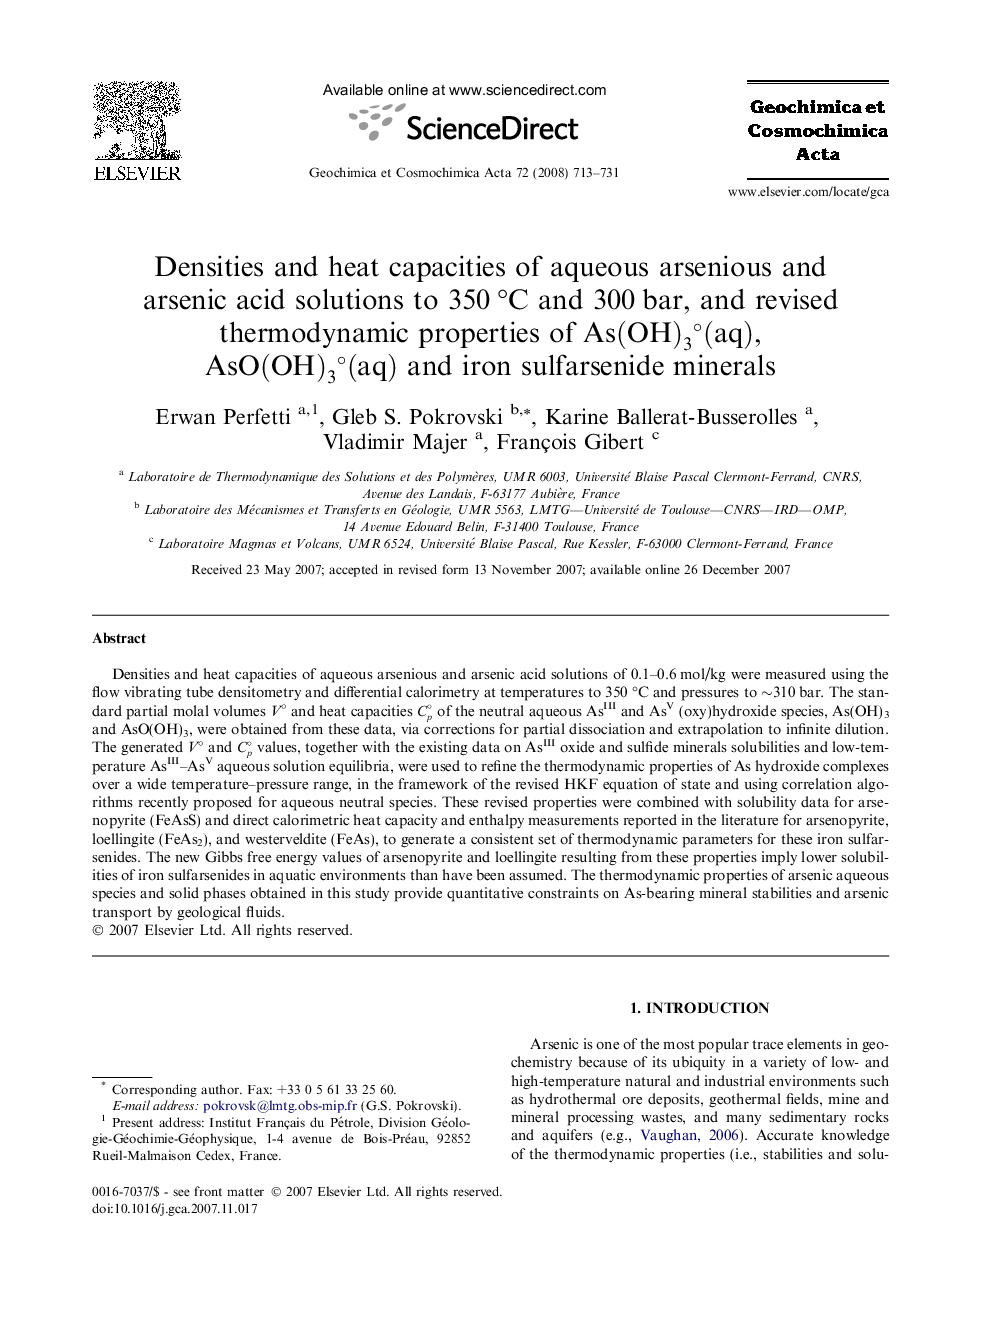 Densities and heat capacities of aqueous arsenious and arsenic acid solutions to 350 °C and 300 bar, and revised thermodynamic properties of As(OH)3∘(aq), AsO(OH)3∘(aq) and iron sulfarsenide minerals